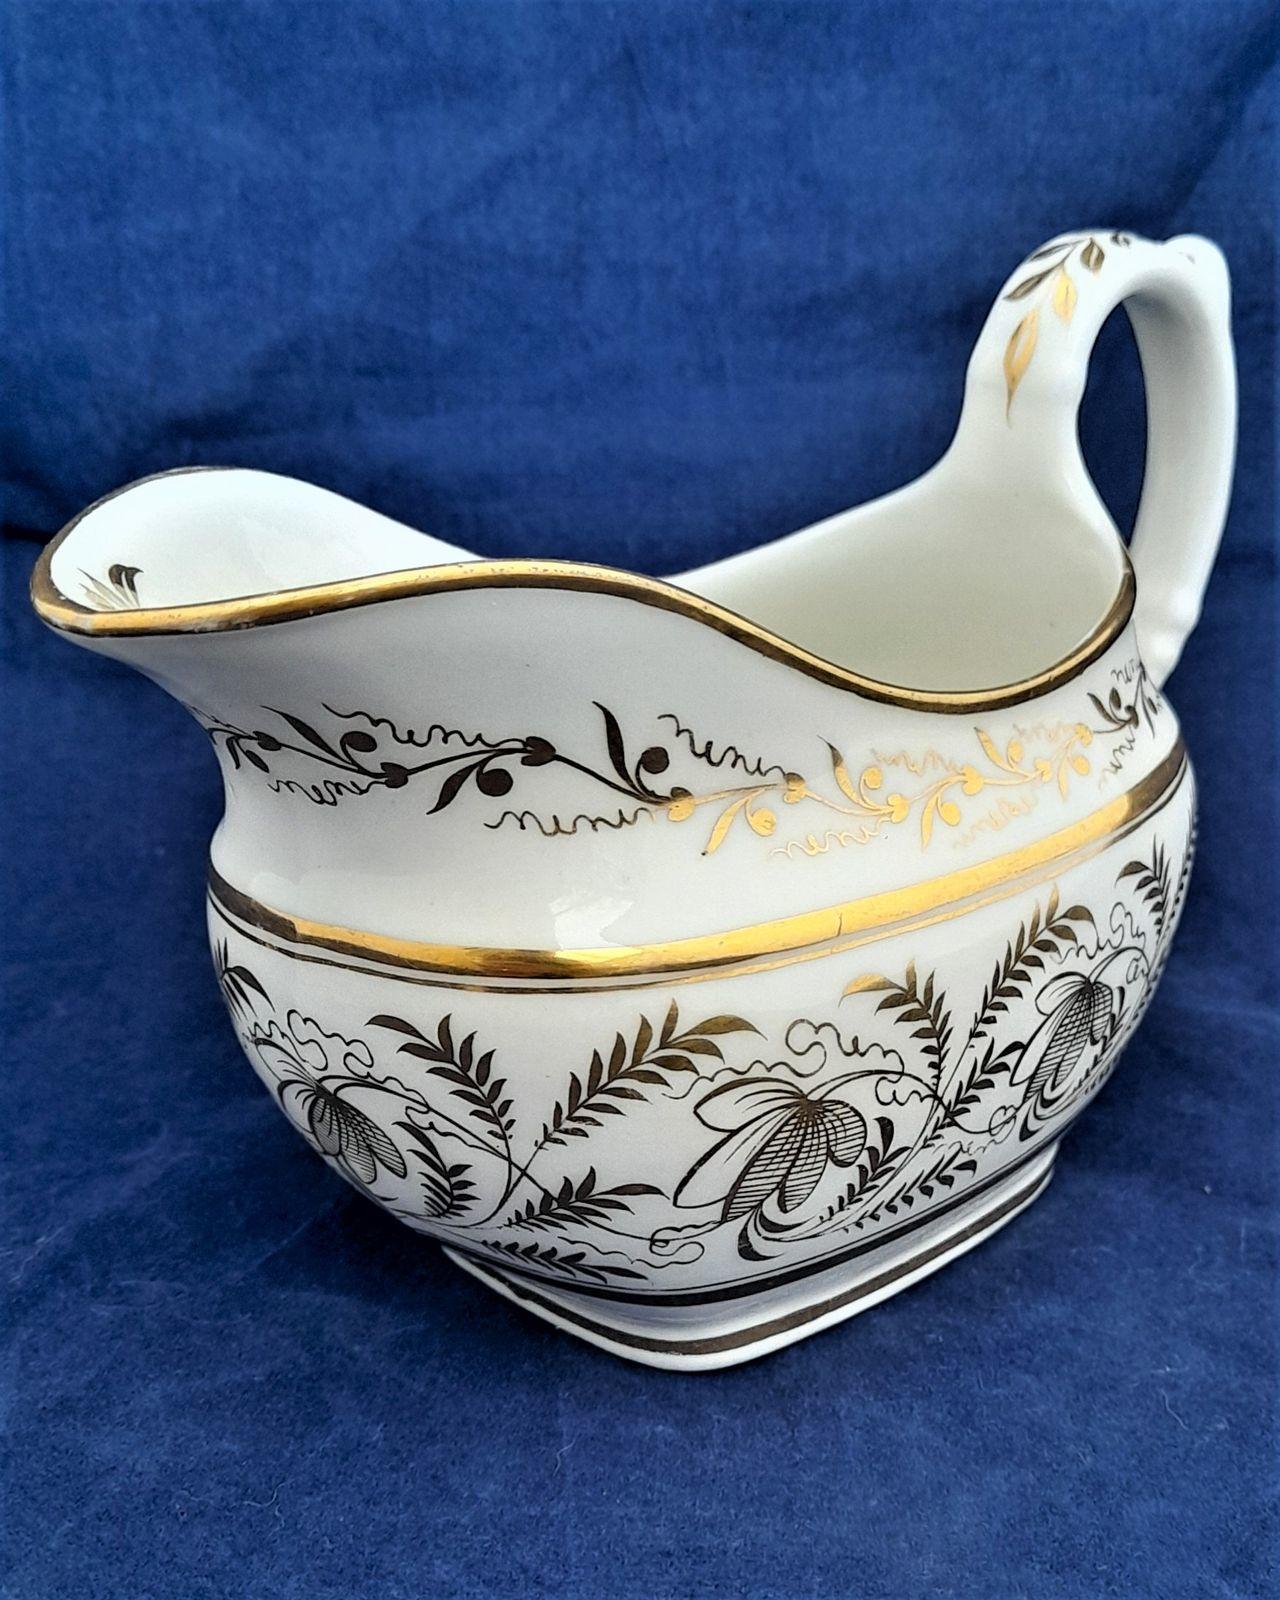 An attractive antique porcelain London shape creamer or milk jug decorated with gilded floriate pattern number 1149, featuring fronded leaves and stylised flowers on a white hybrid hard paste porcelain ground. The gilt pattern number 1149 is painted underneath. There is gilded lining or banding around the rim. The creamer was made by Thomas Rose of Coalport and dates to around 1812 during the Regency period of the later George IV.